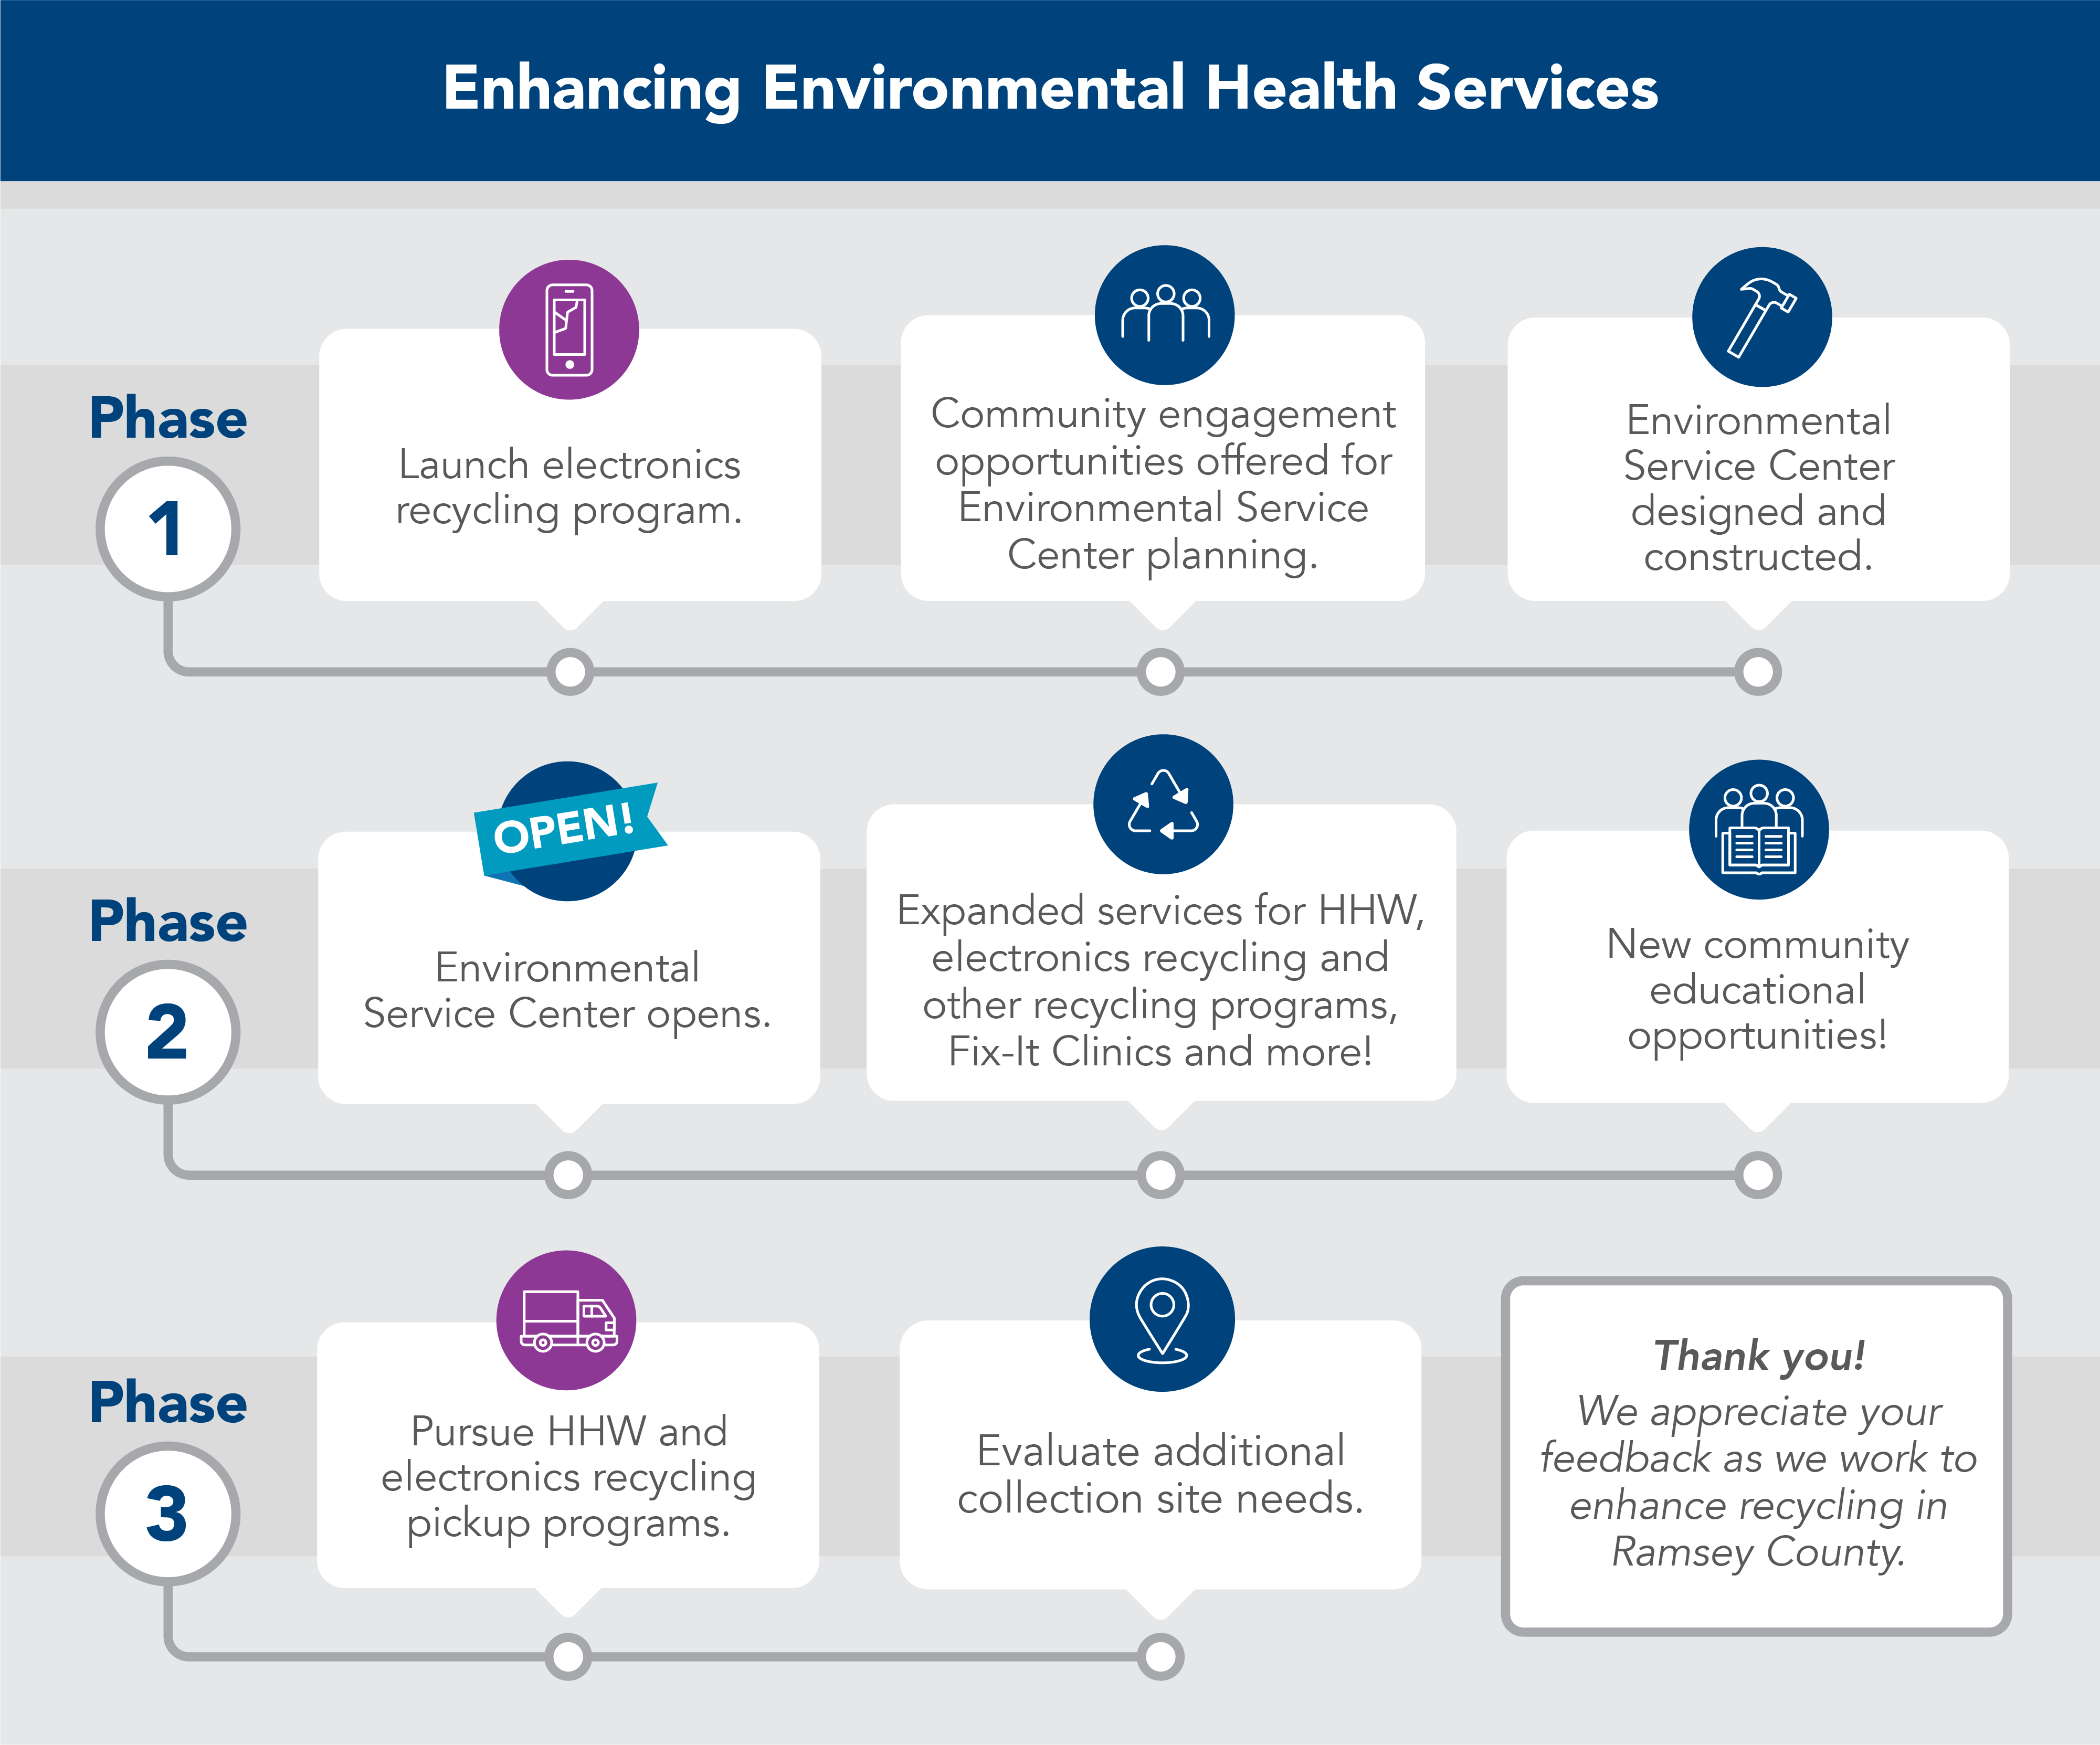 Overview of Enhancing Environmental Health Services